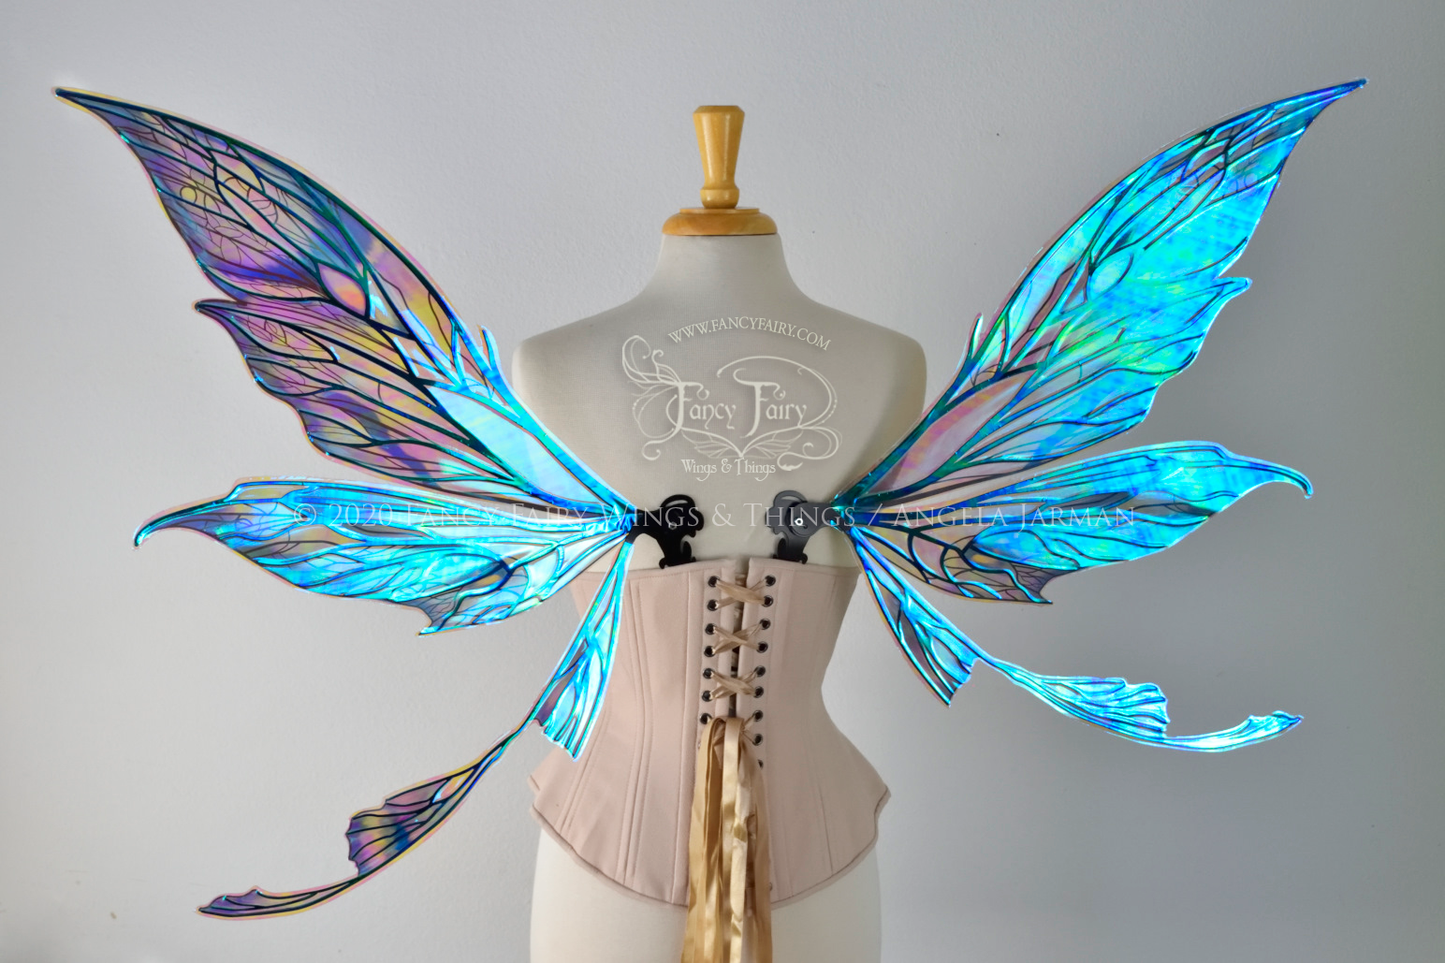 Colette 'Blue Moon' Convertible Iridescent "Pix" Fairy Wings with Black Veins